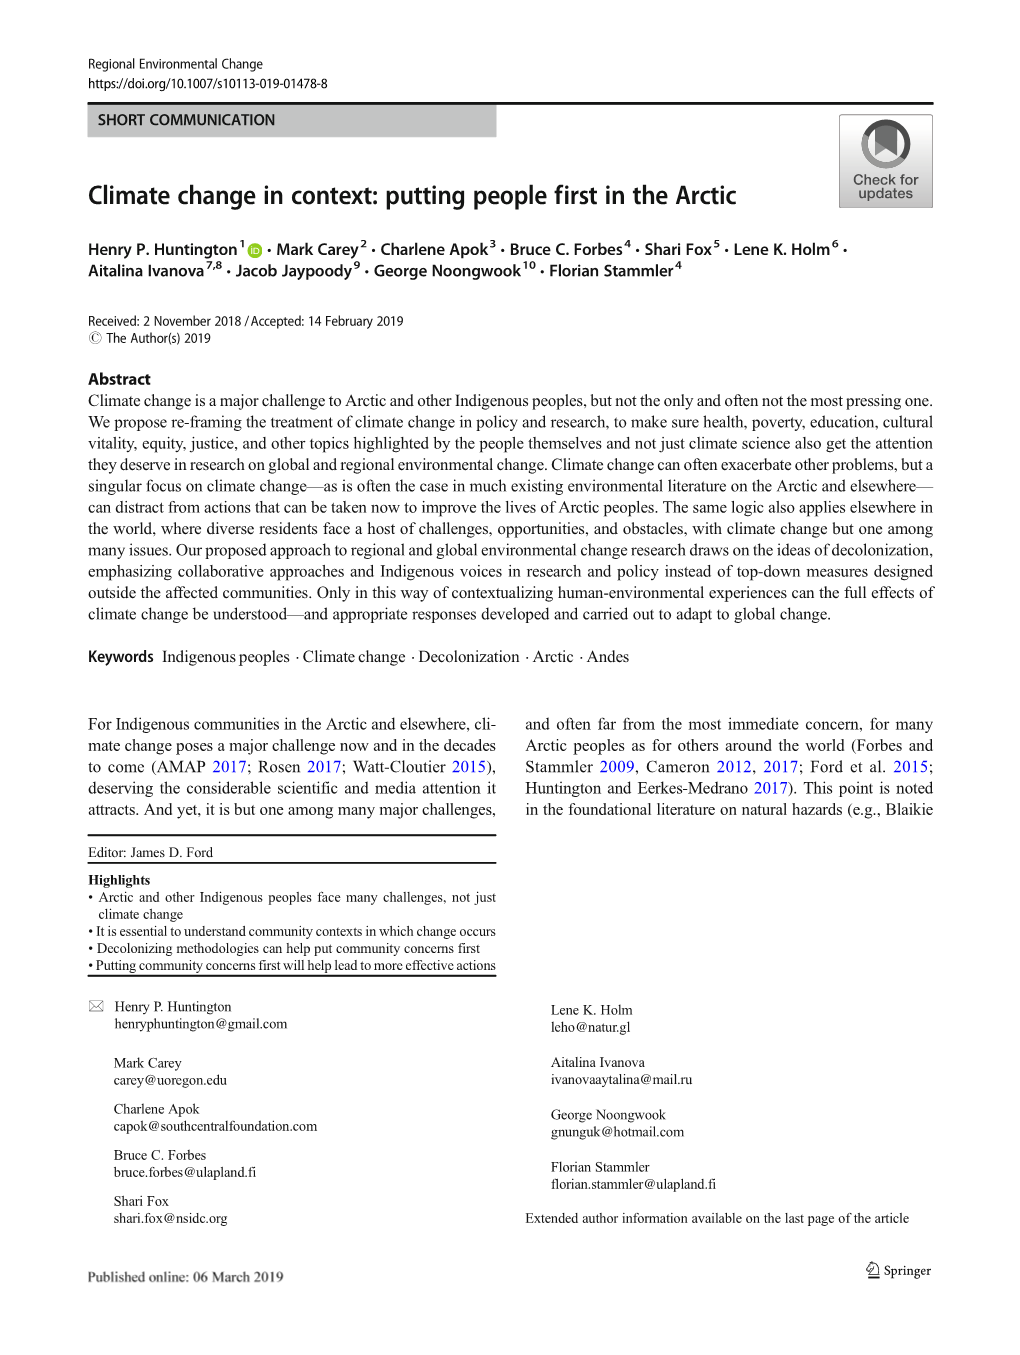 Climate Change in Context: Putting People First in the Arctic